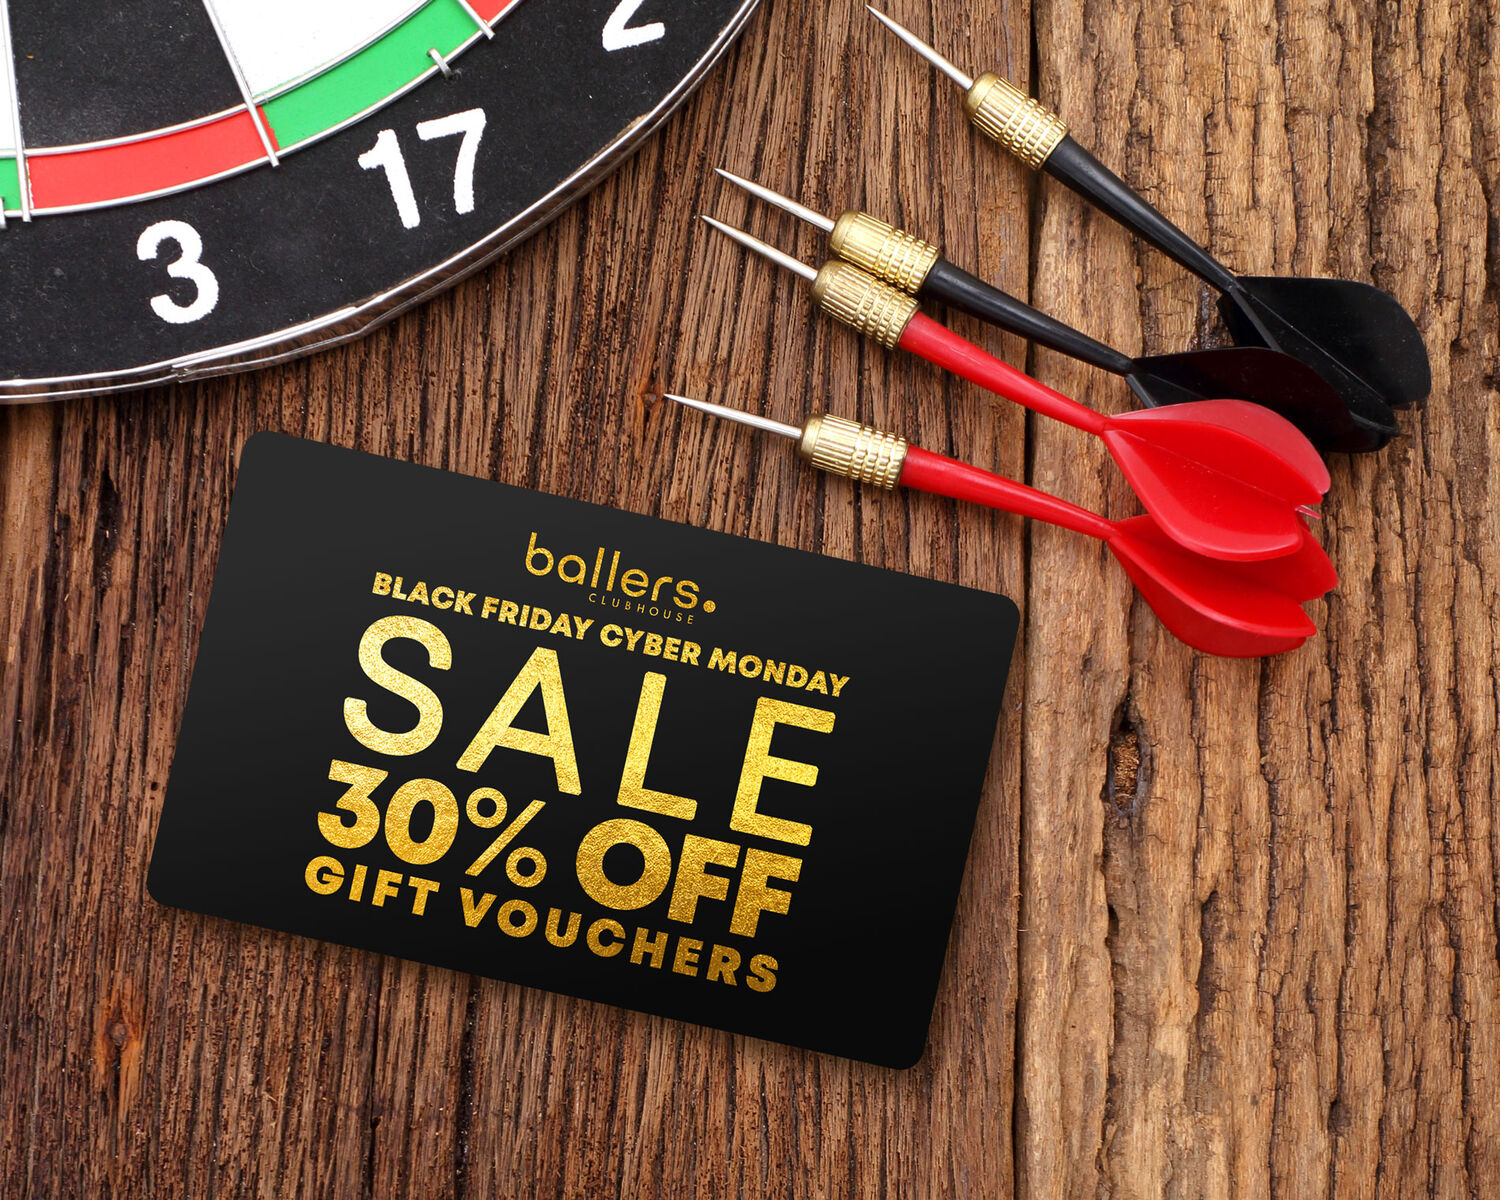 Black Friday Cyber Monday SALE | 30% OFF Gift Vouchers! | Christmas Gift Ideas Melbourne | Ballers Clubhouse